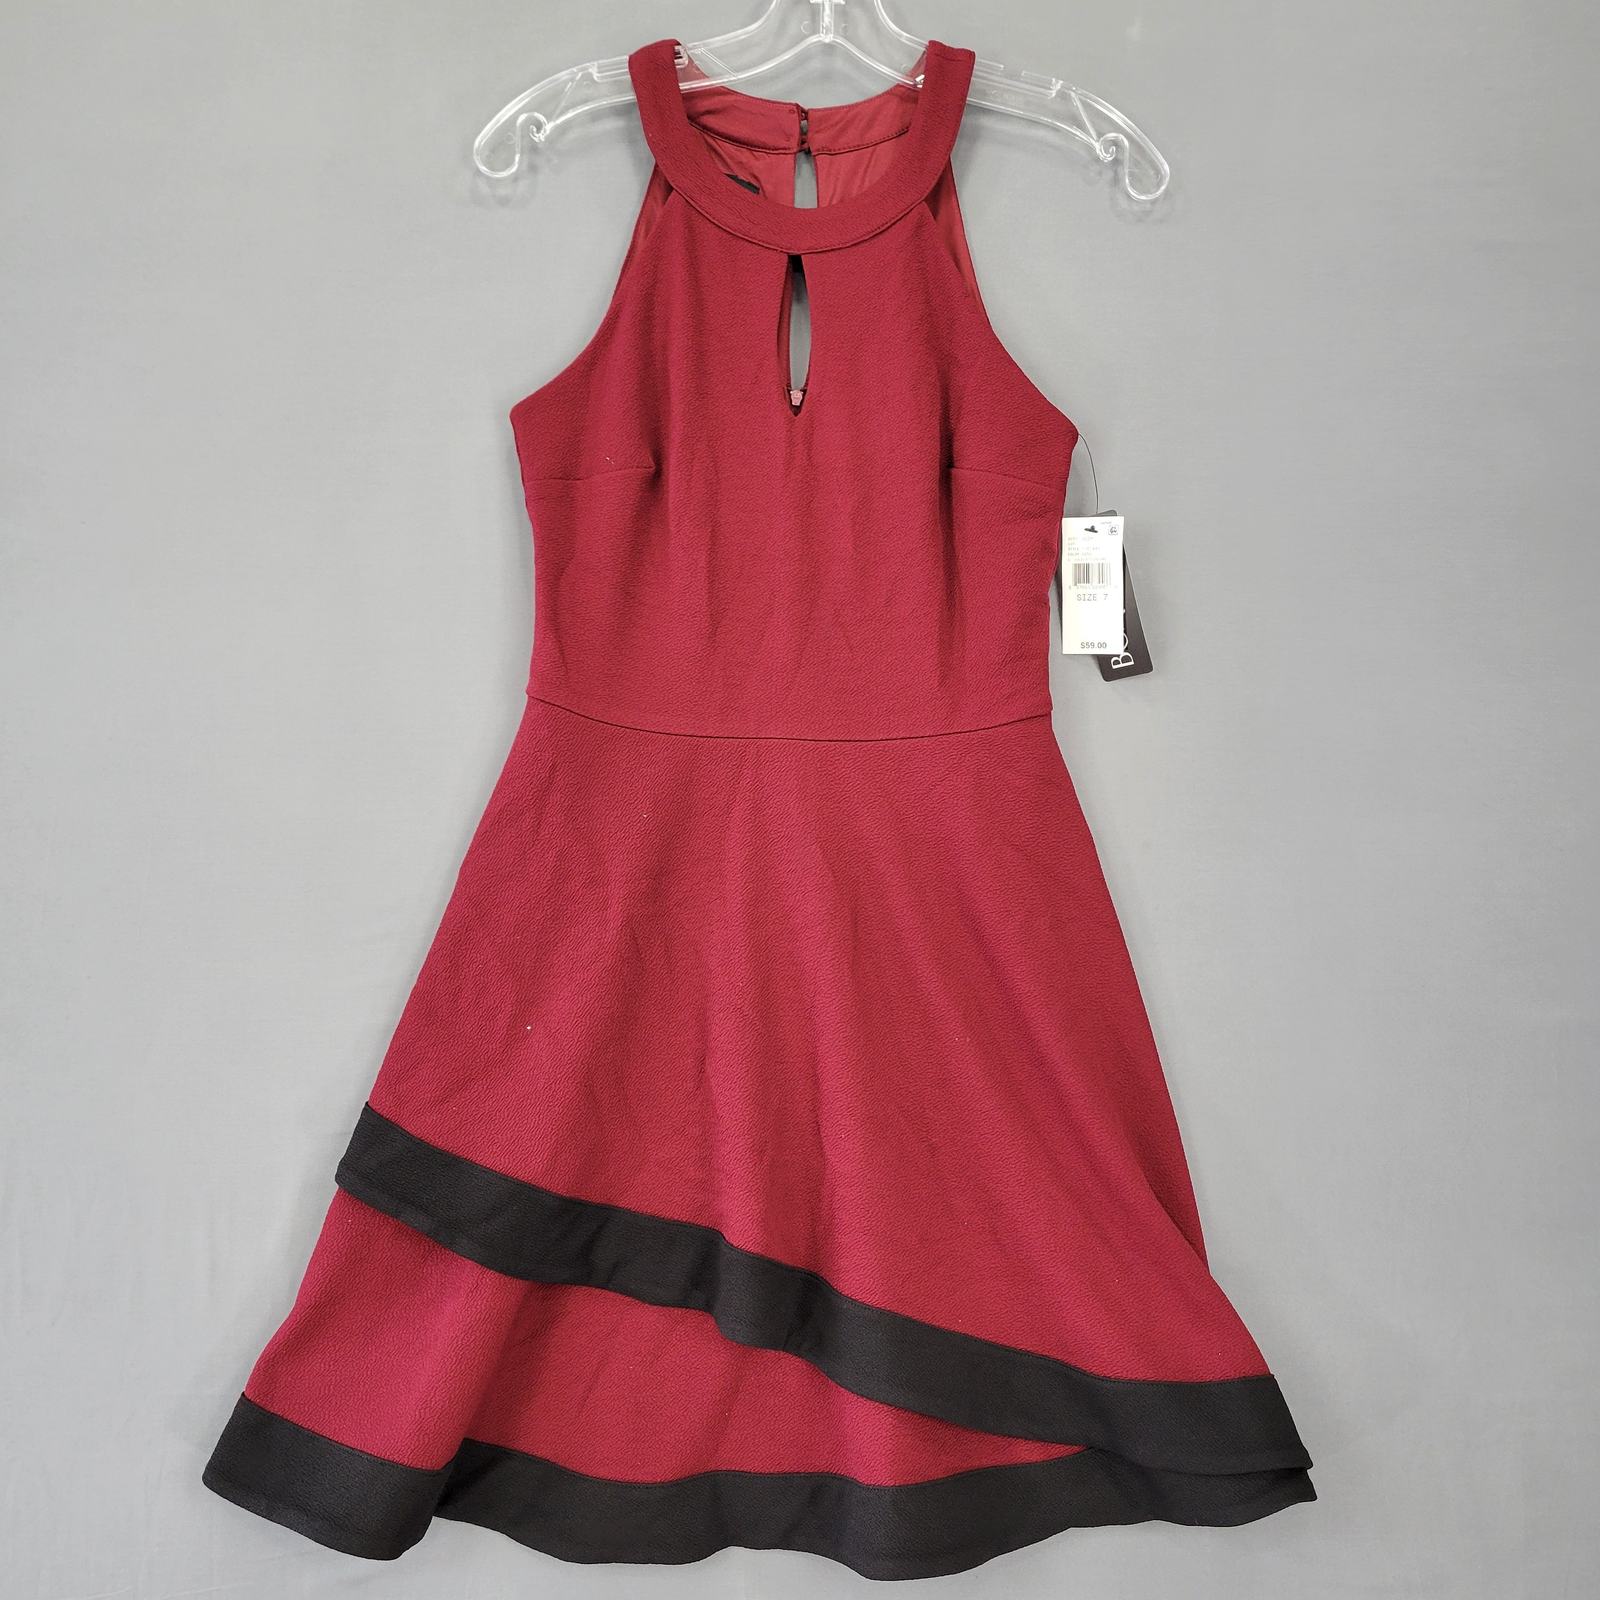 Primary image for BCX Women Dress Size 7 Juniors Red Midi Stretch Preppy A-Line Ruffle Sleeveless